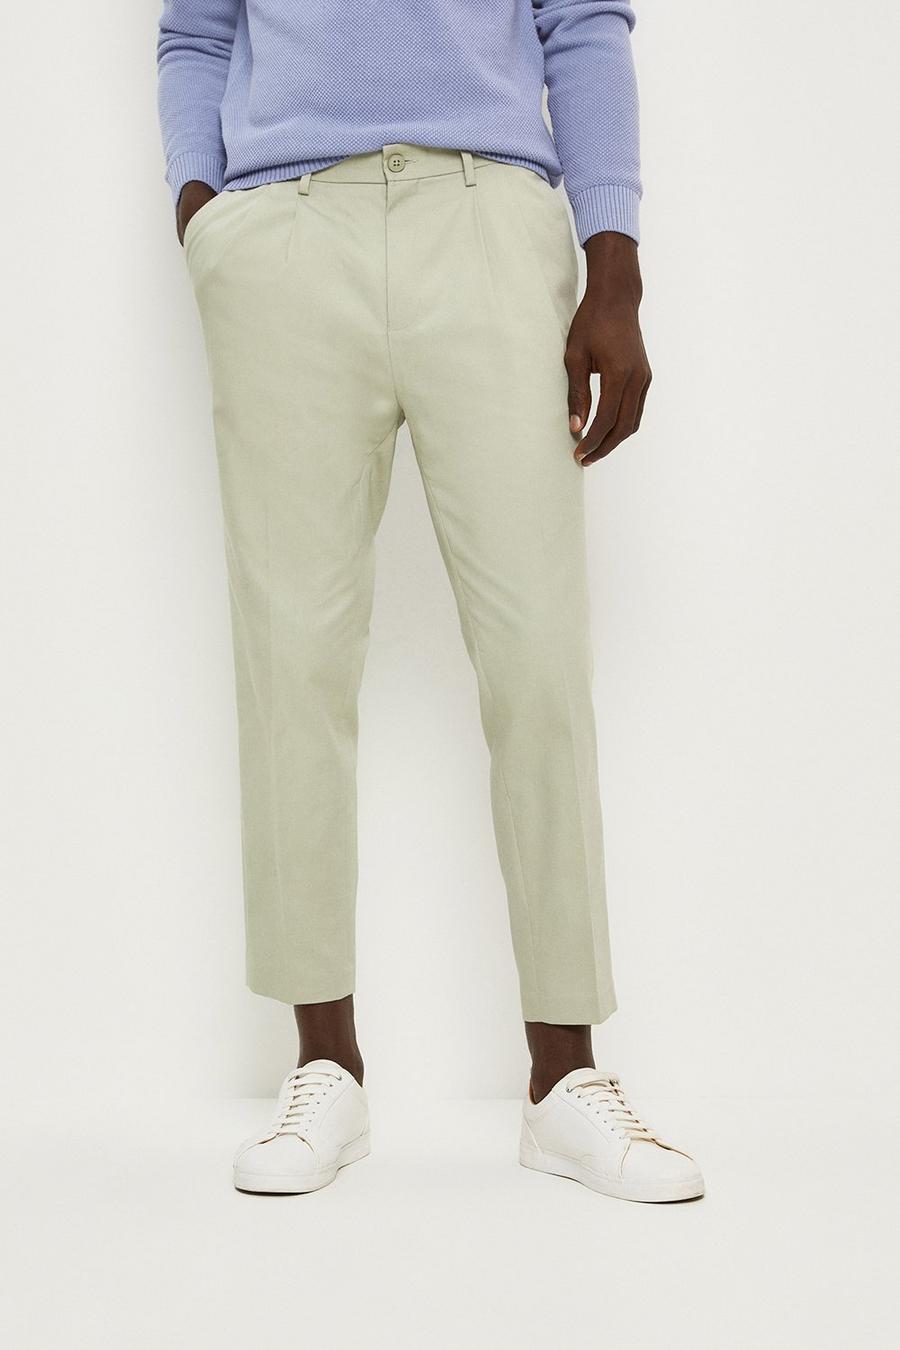 Slim Fit Light Green Pleat Front Smart Chinos